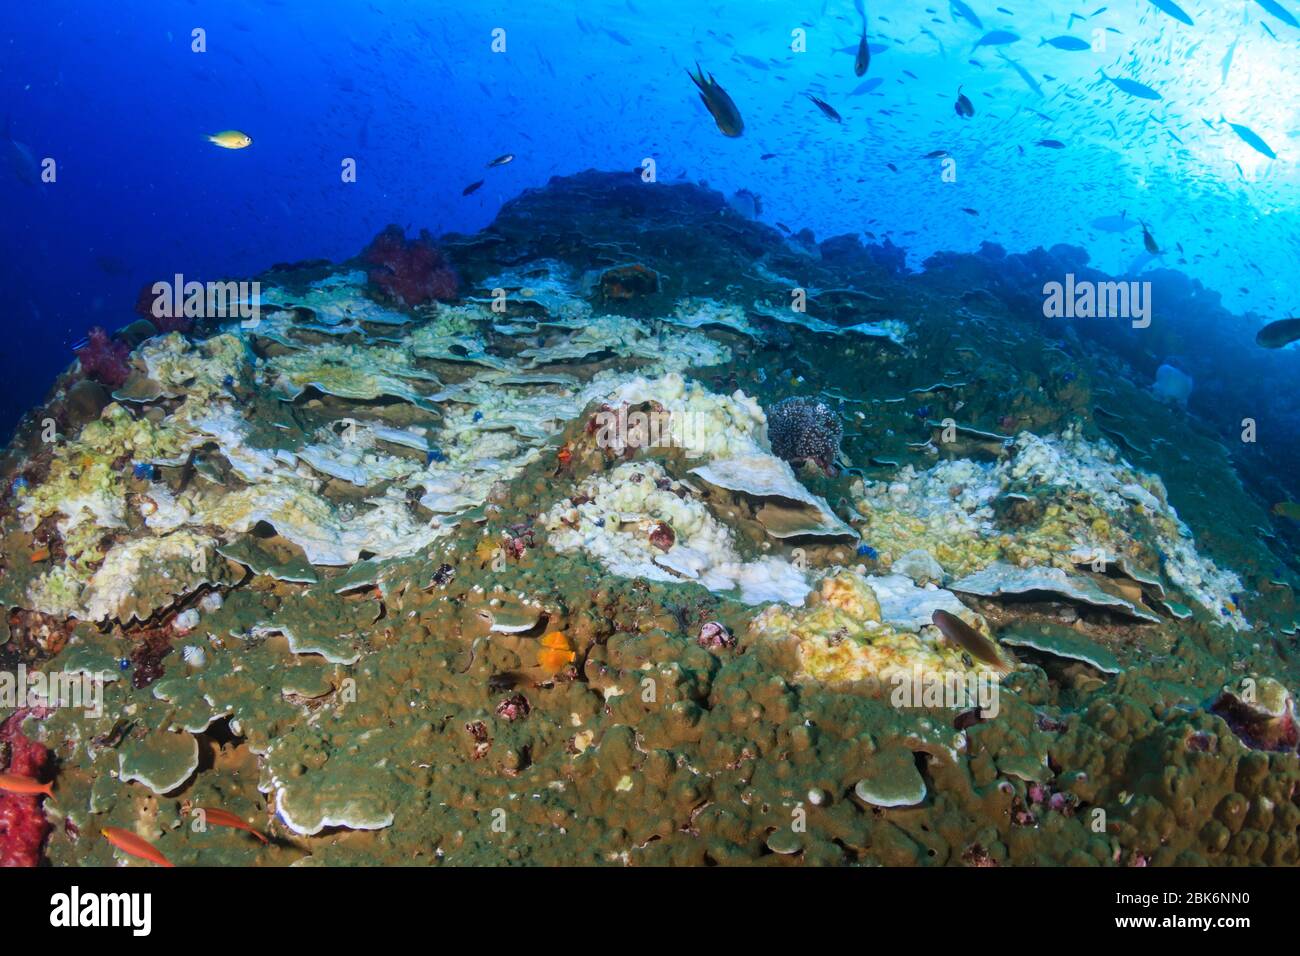 Underwater coral bleaching event on a hard coral reef system due to higher than normal ocean temperatures Stock Photo